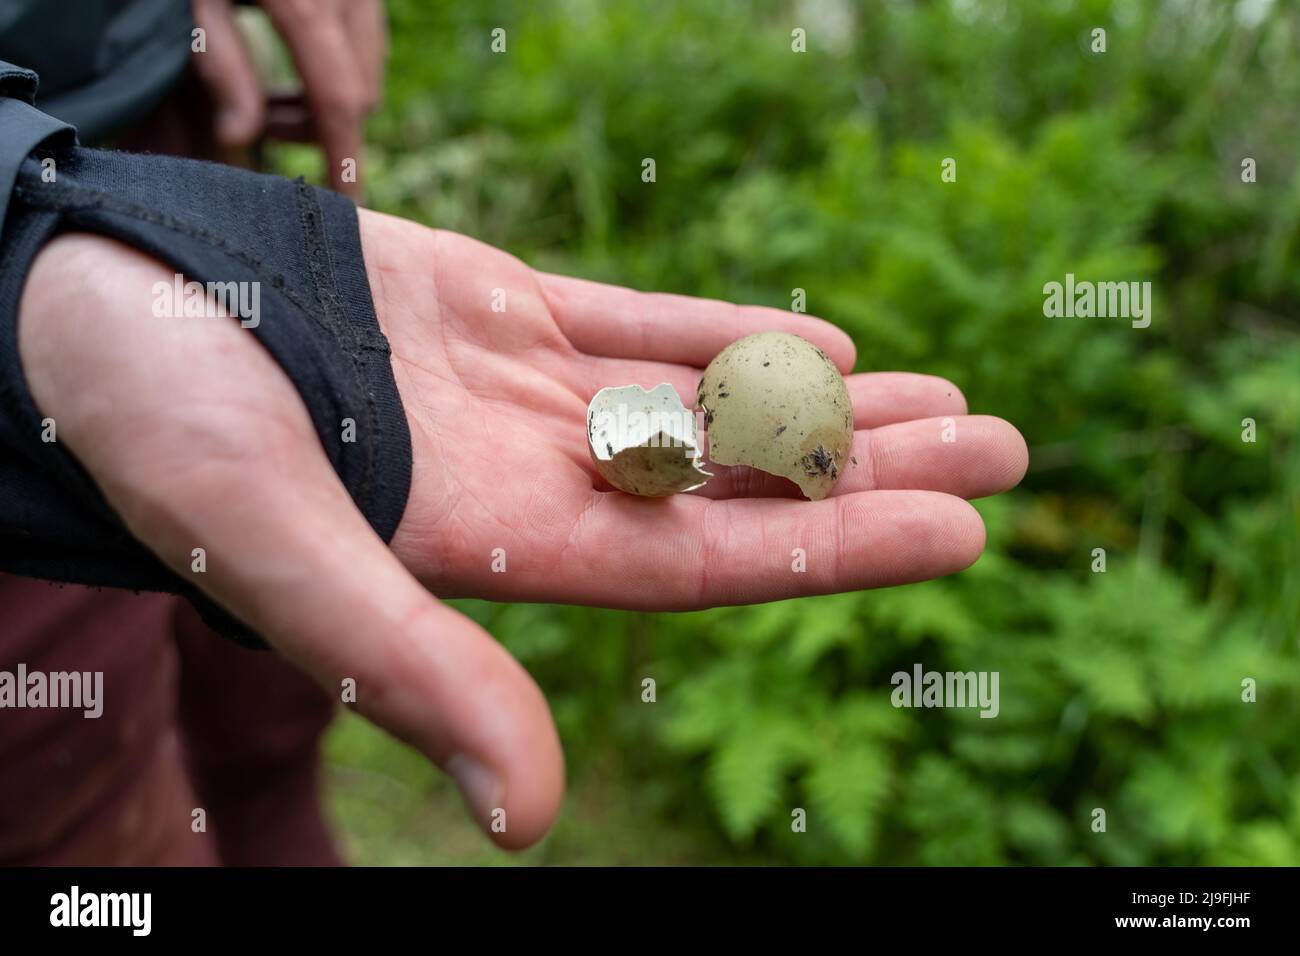 A person holding a wild bird egg shell, found lying on the ground at Hauxley Nature Reserve, Northumberland, UK. Stock Photo